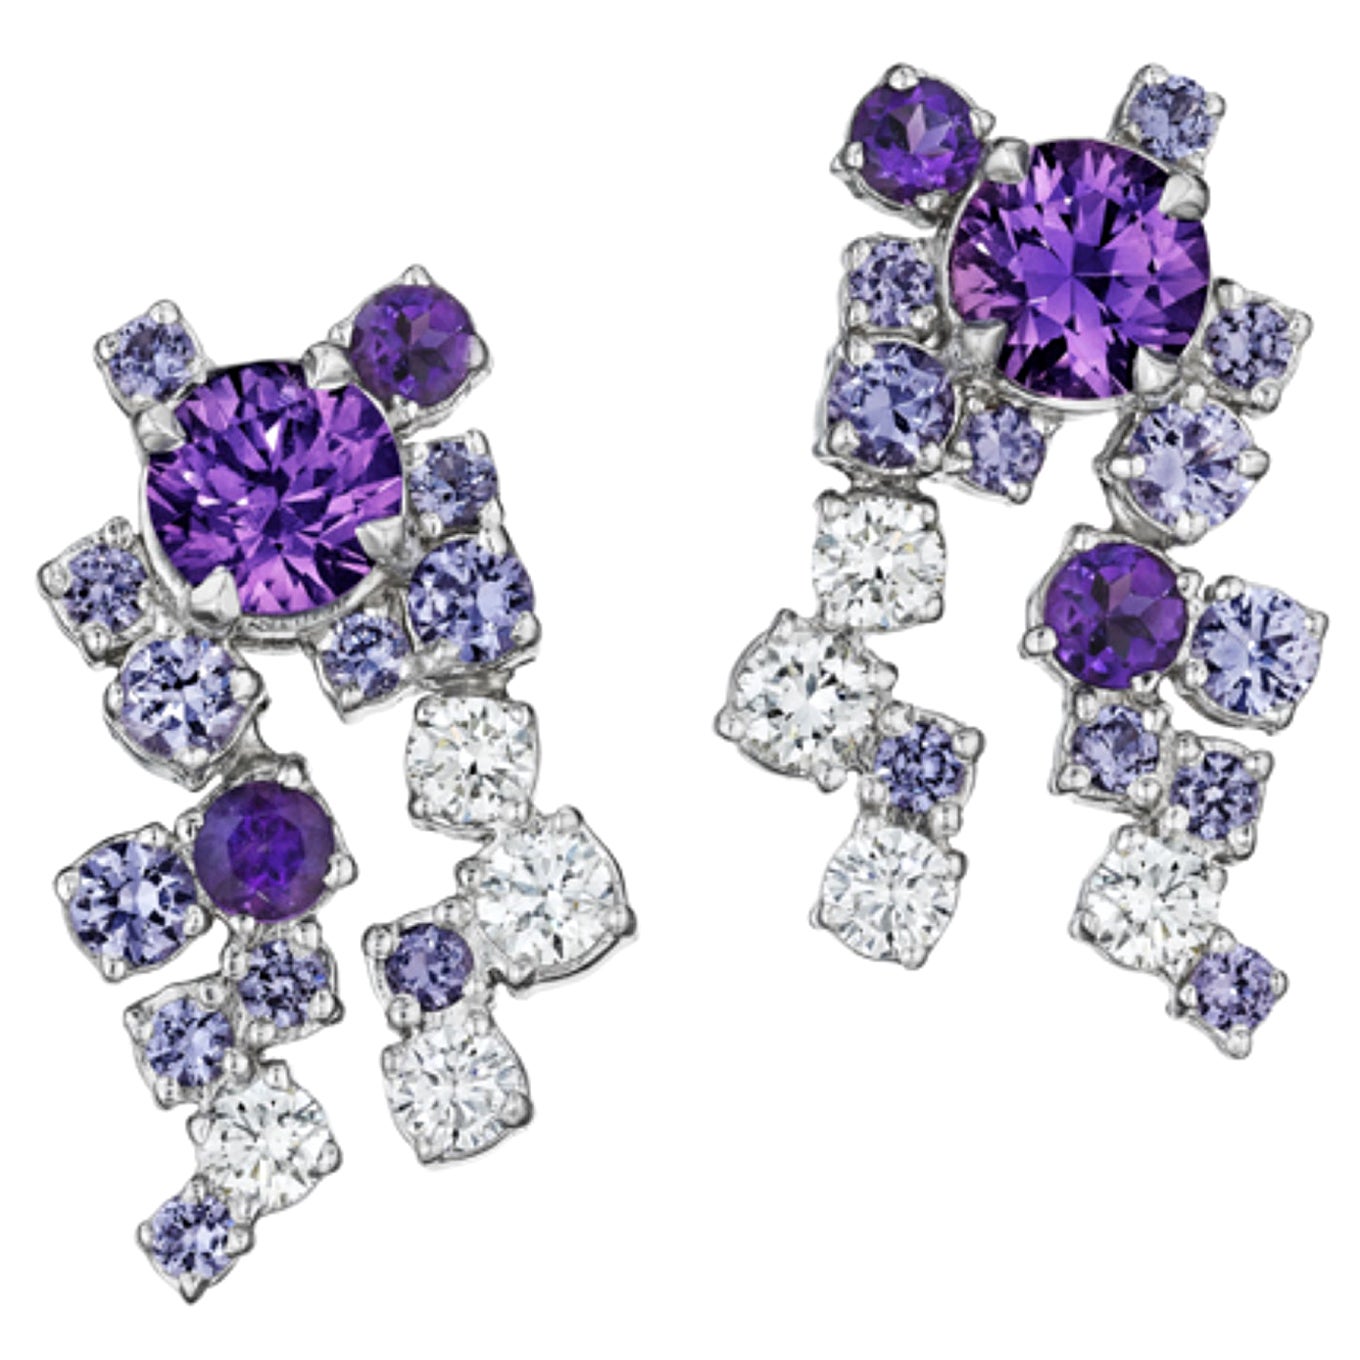 Melting Ice 18k White Gold Purple Sapphire Earrings by MadStone For Sale